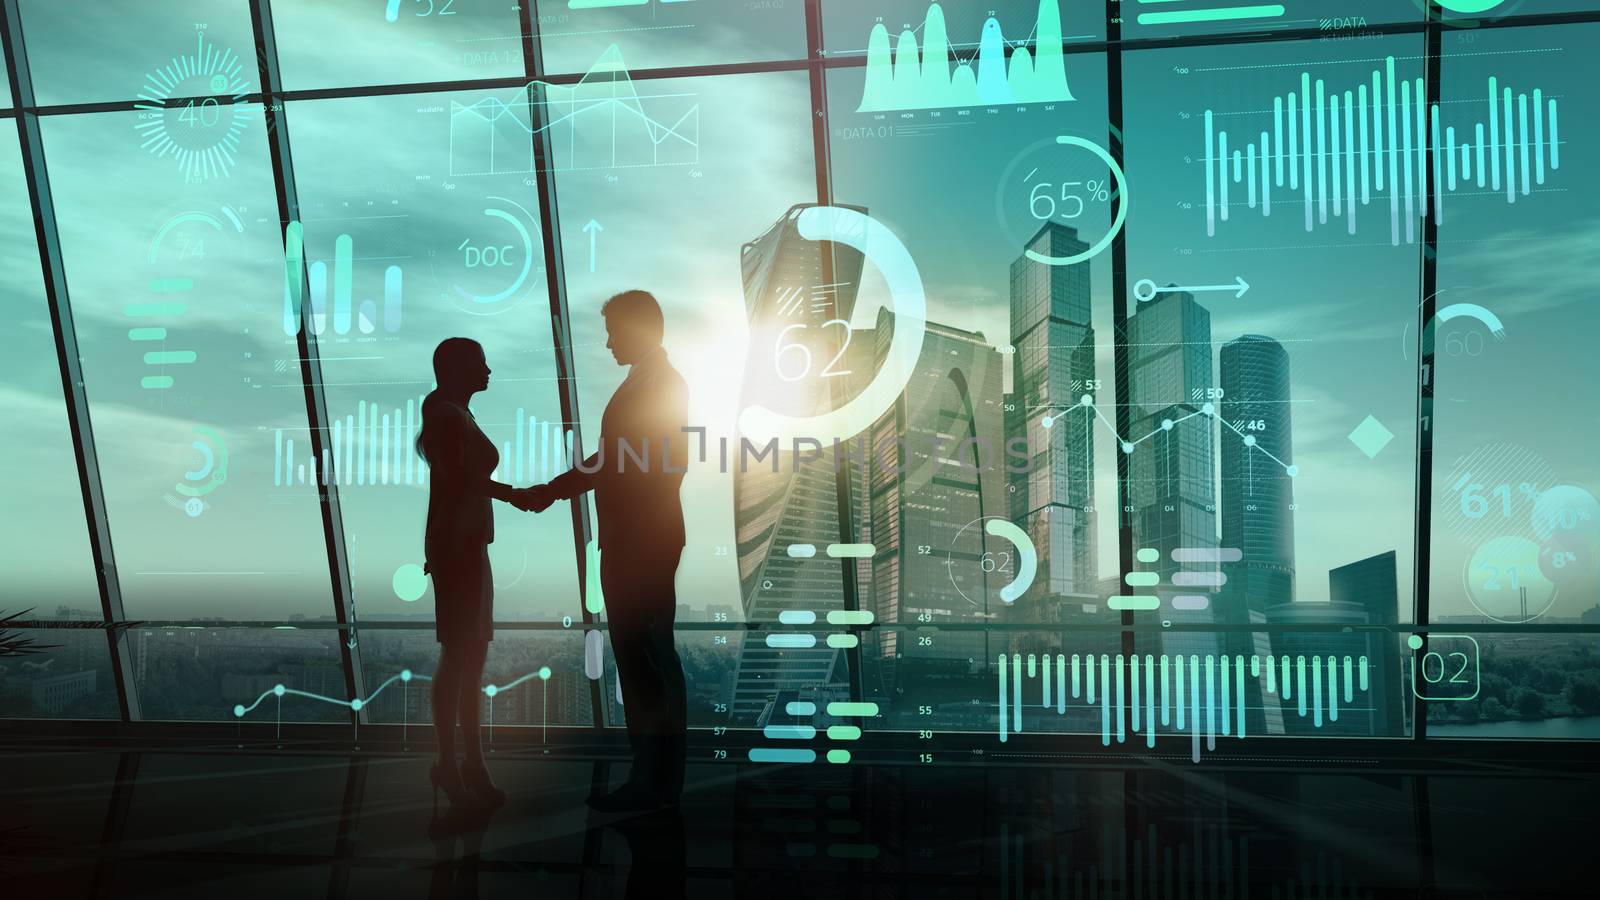 Silhouettes of business people in a handshake against the background of a window overlooking skyscrapers and a virtual infographic.